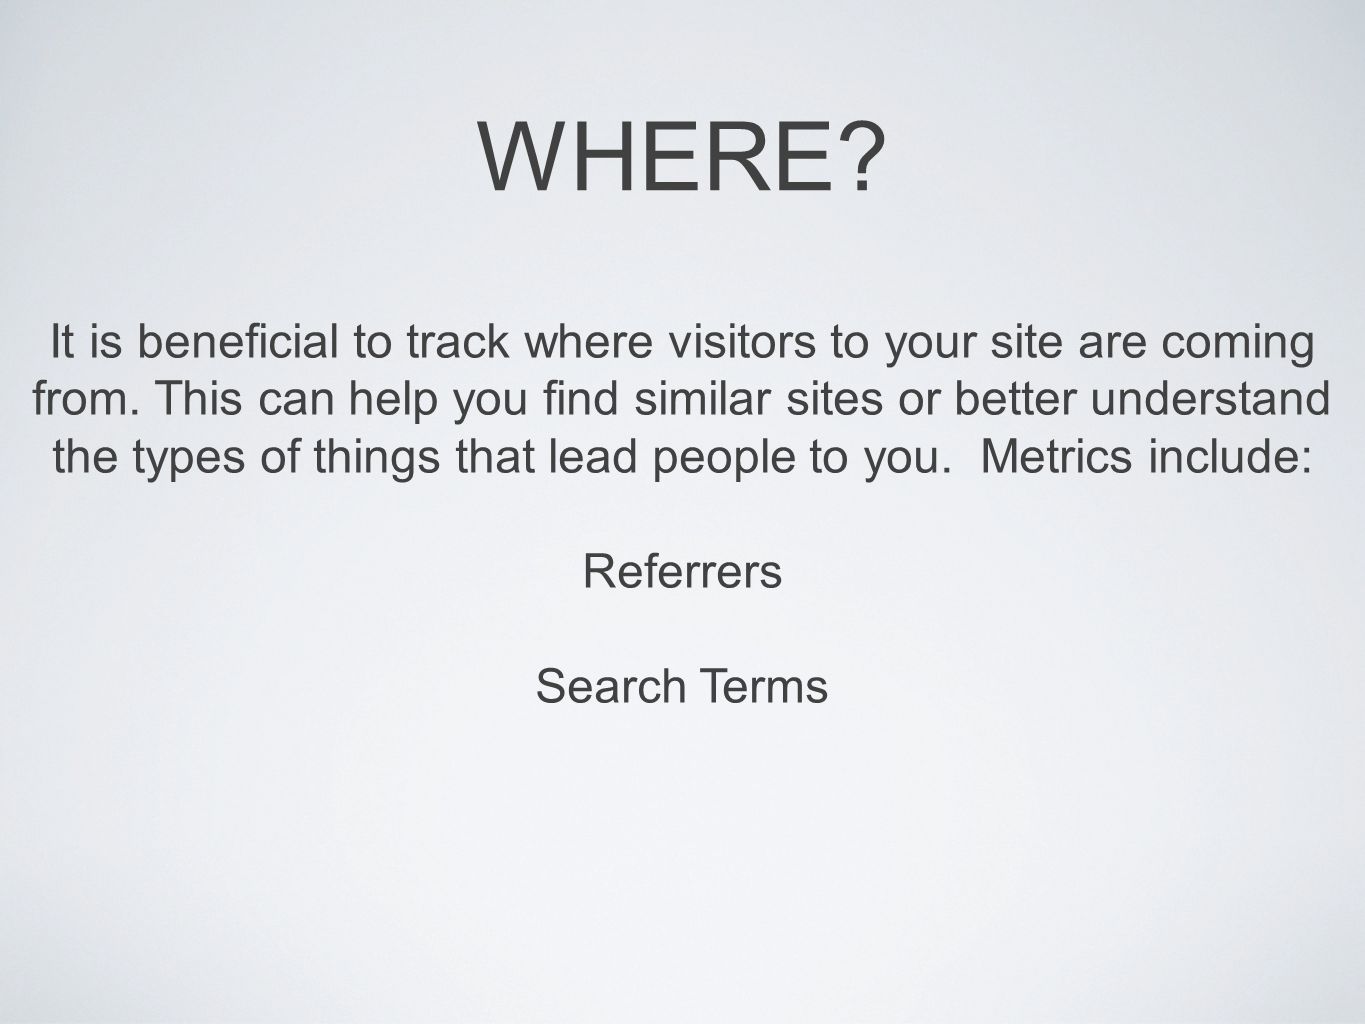 WHERE. It is beneficial to track where visitors to your site are coming from.